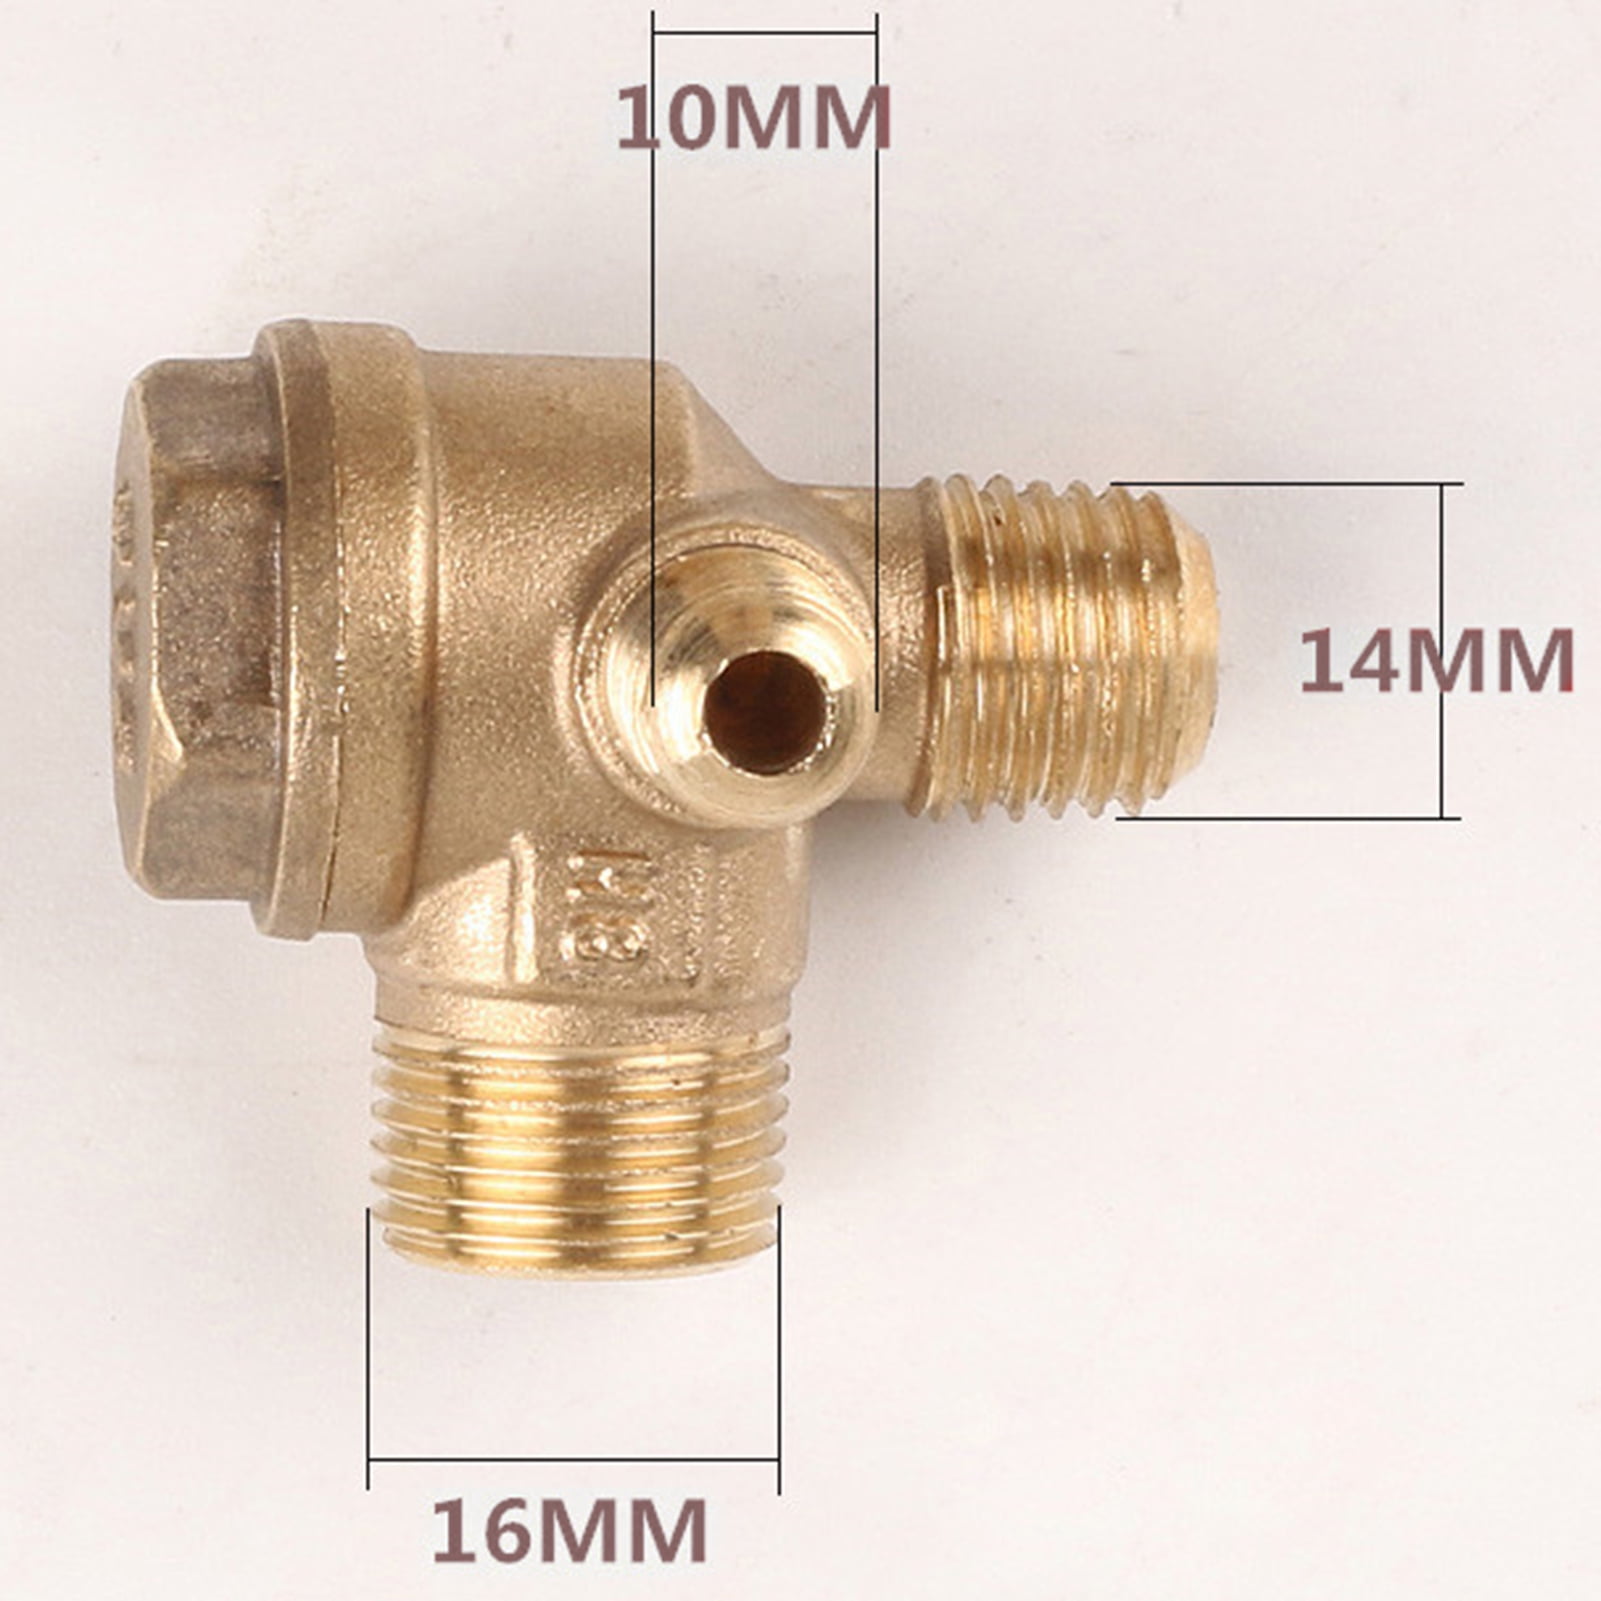 Tank Check Valve,Air Compressor Brass Three-way Unidirectional Check Valve Connect Pipe Fittings 